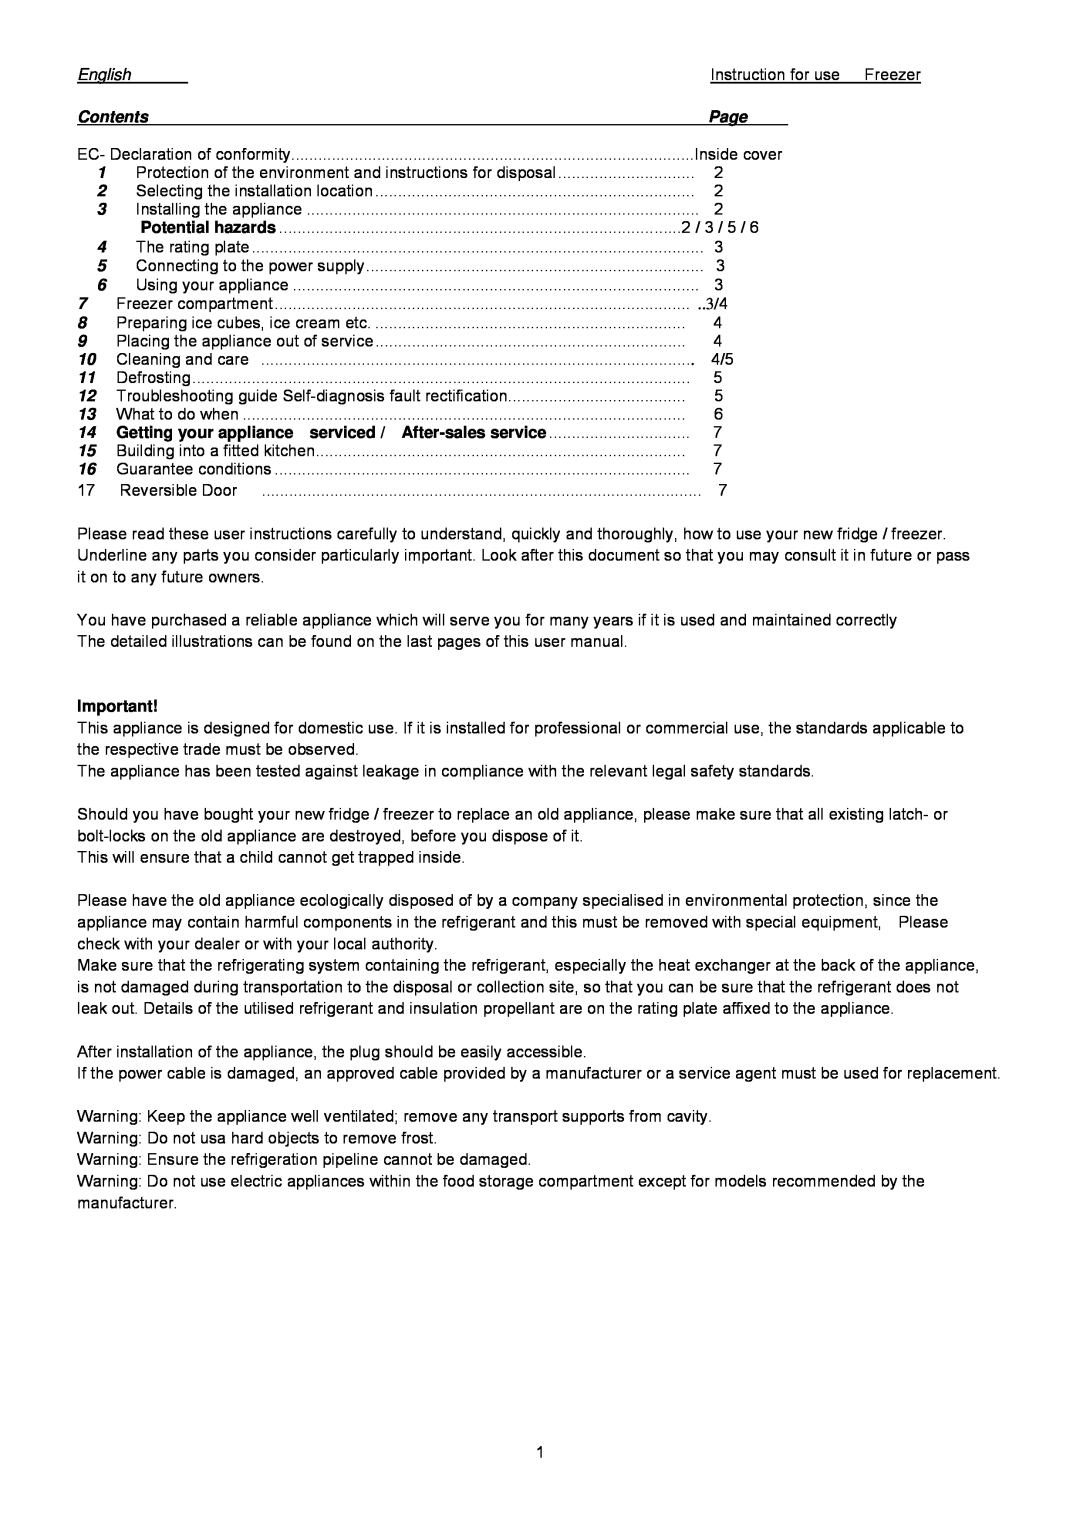 Haier HFH-50 manual Contents, Page, Getting your appliance serviced / After-sales service 